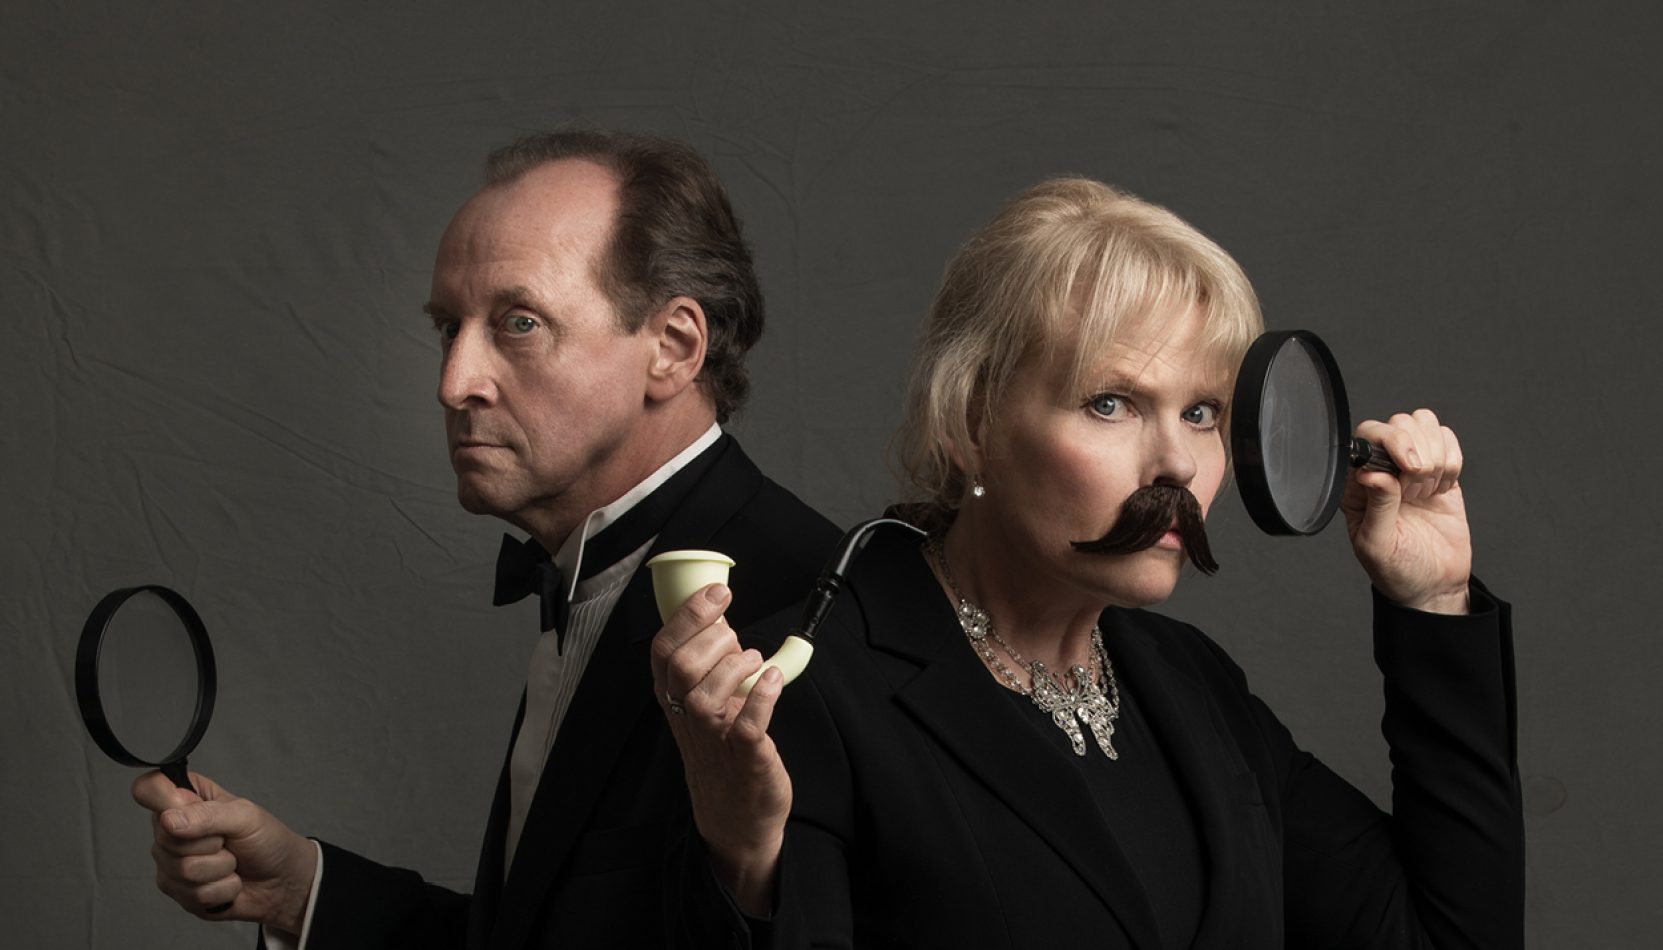 yvonne arnaud theatre, guildford, surrey, june 21, july 21, hound of the baskervilles, theatre, comedy, live music, whats on, guide to whats on, guide to surrey, guide to event, culture, events in surrey, things to do in surrey, whats on,